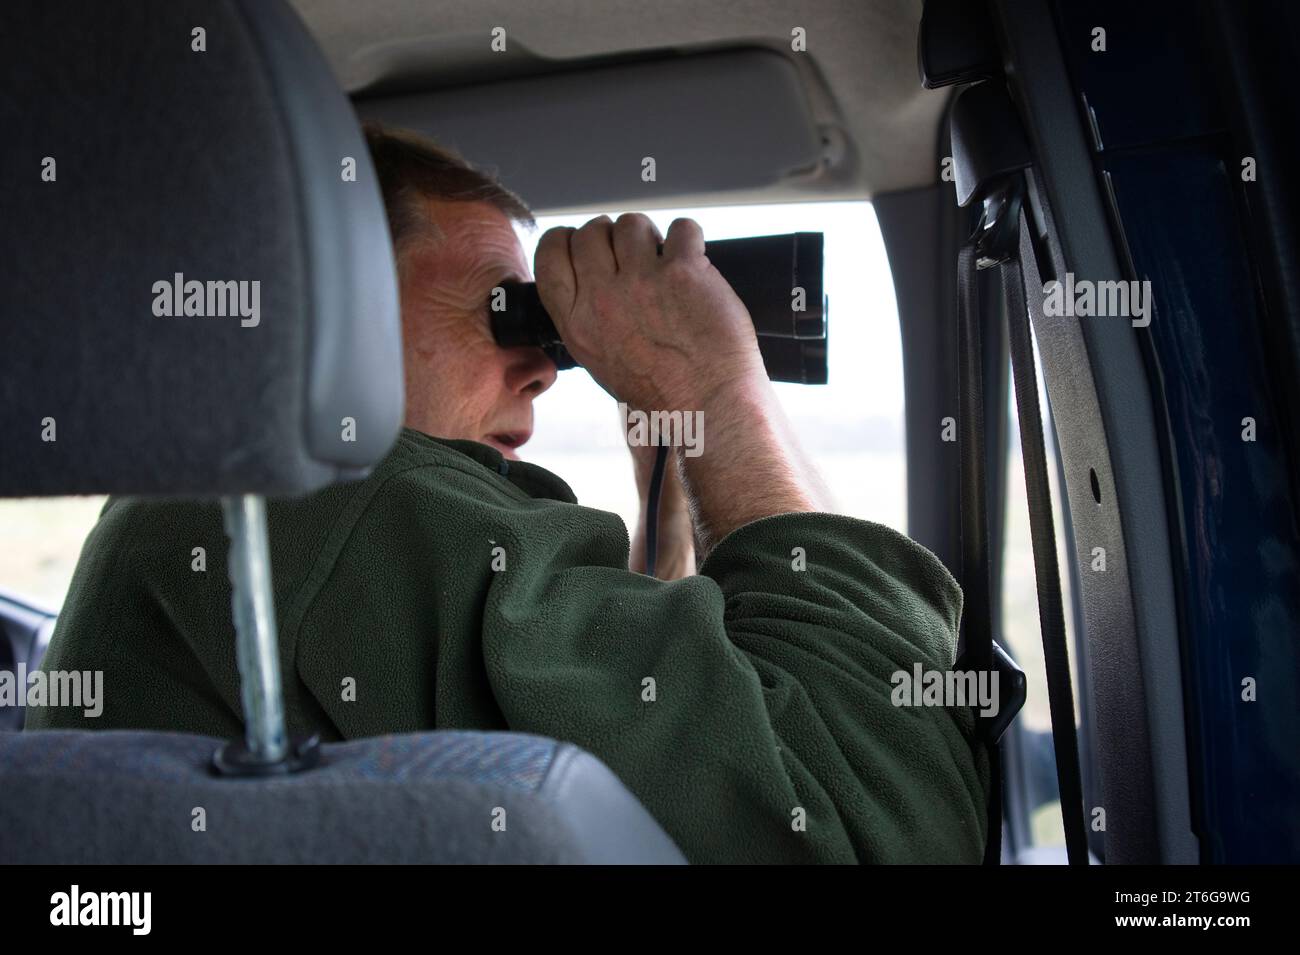 A man sitting in his car looks through binoculars. It's a muskrat fighter at work. Stock Photo